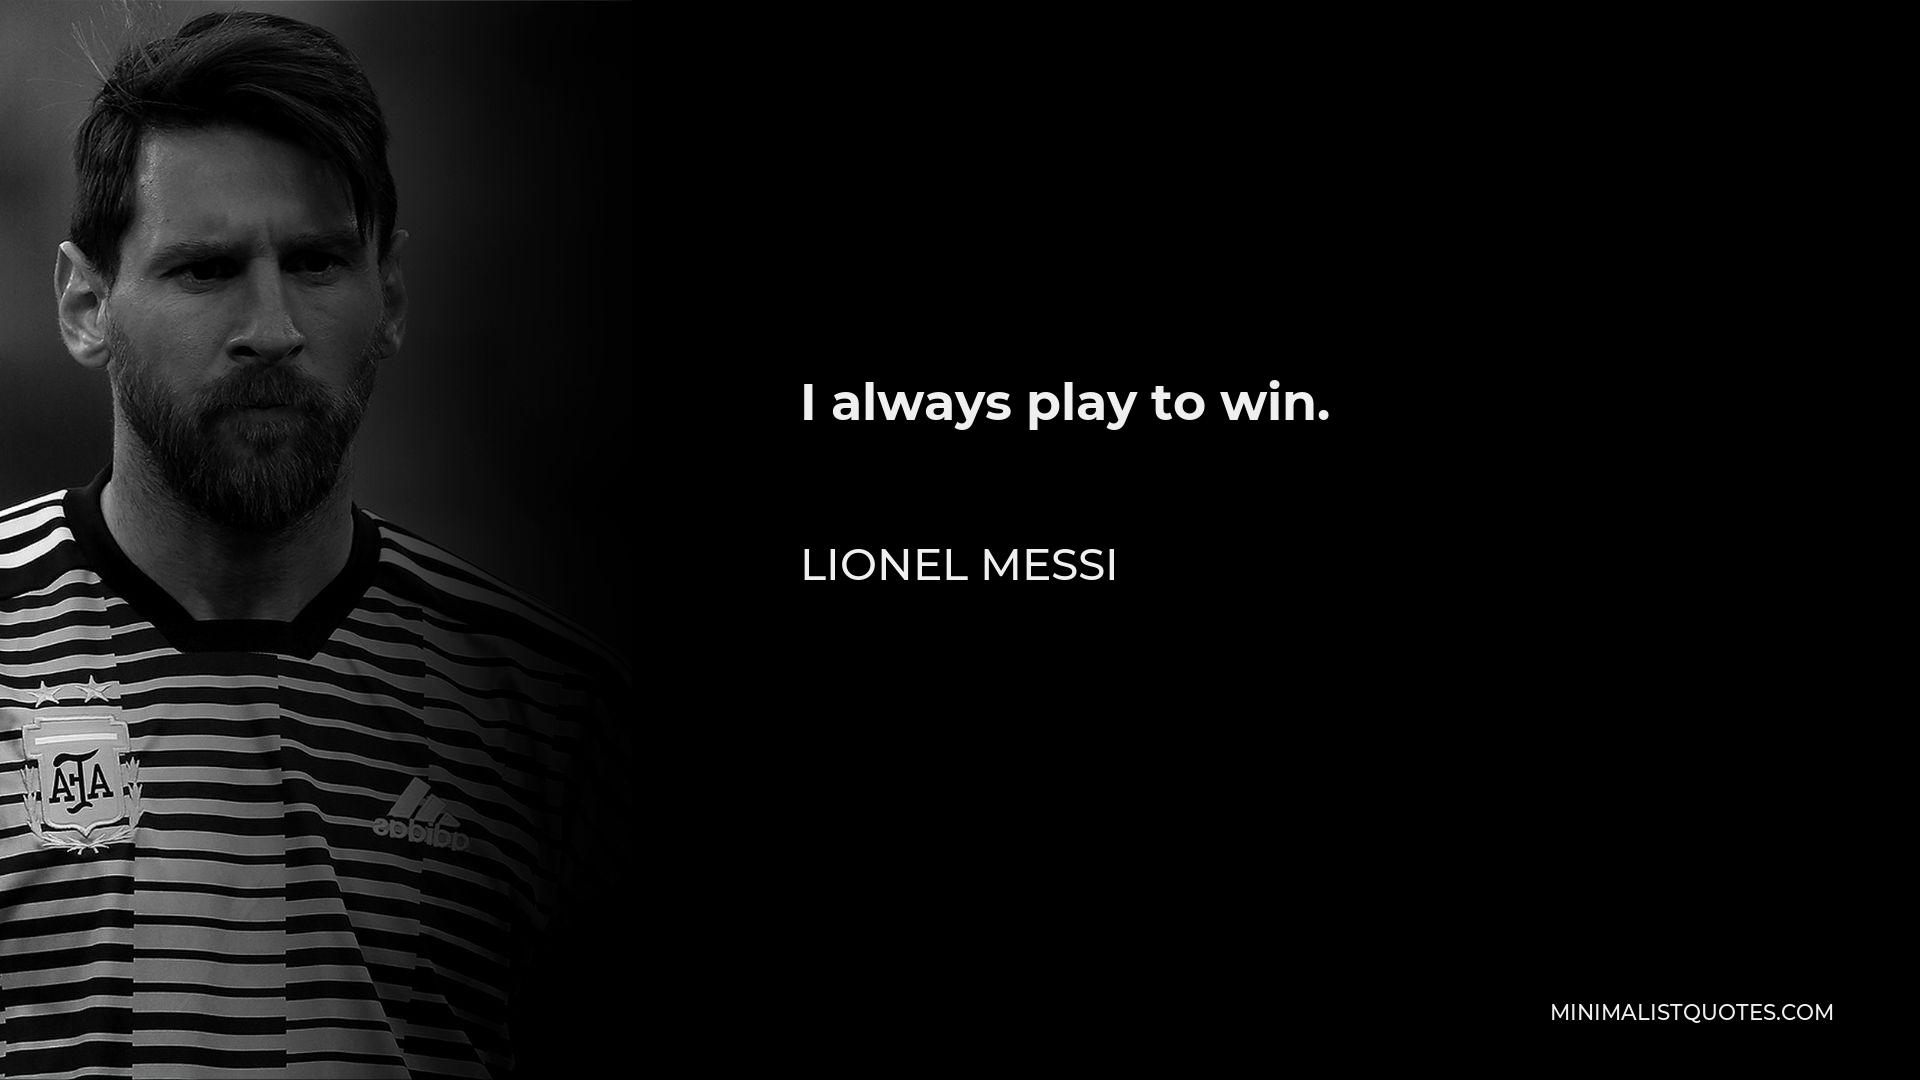 Lionel Messi Quote - I always play to win.